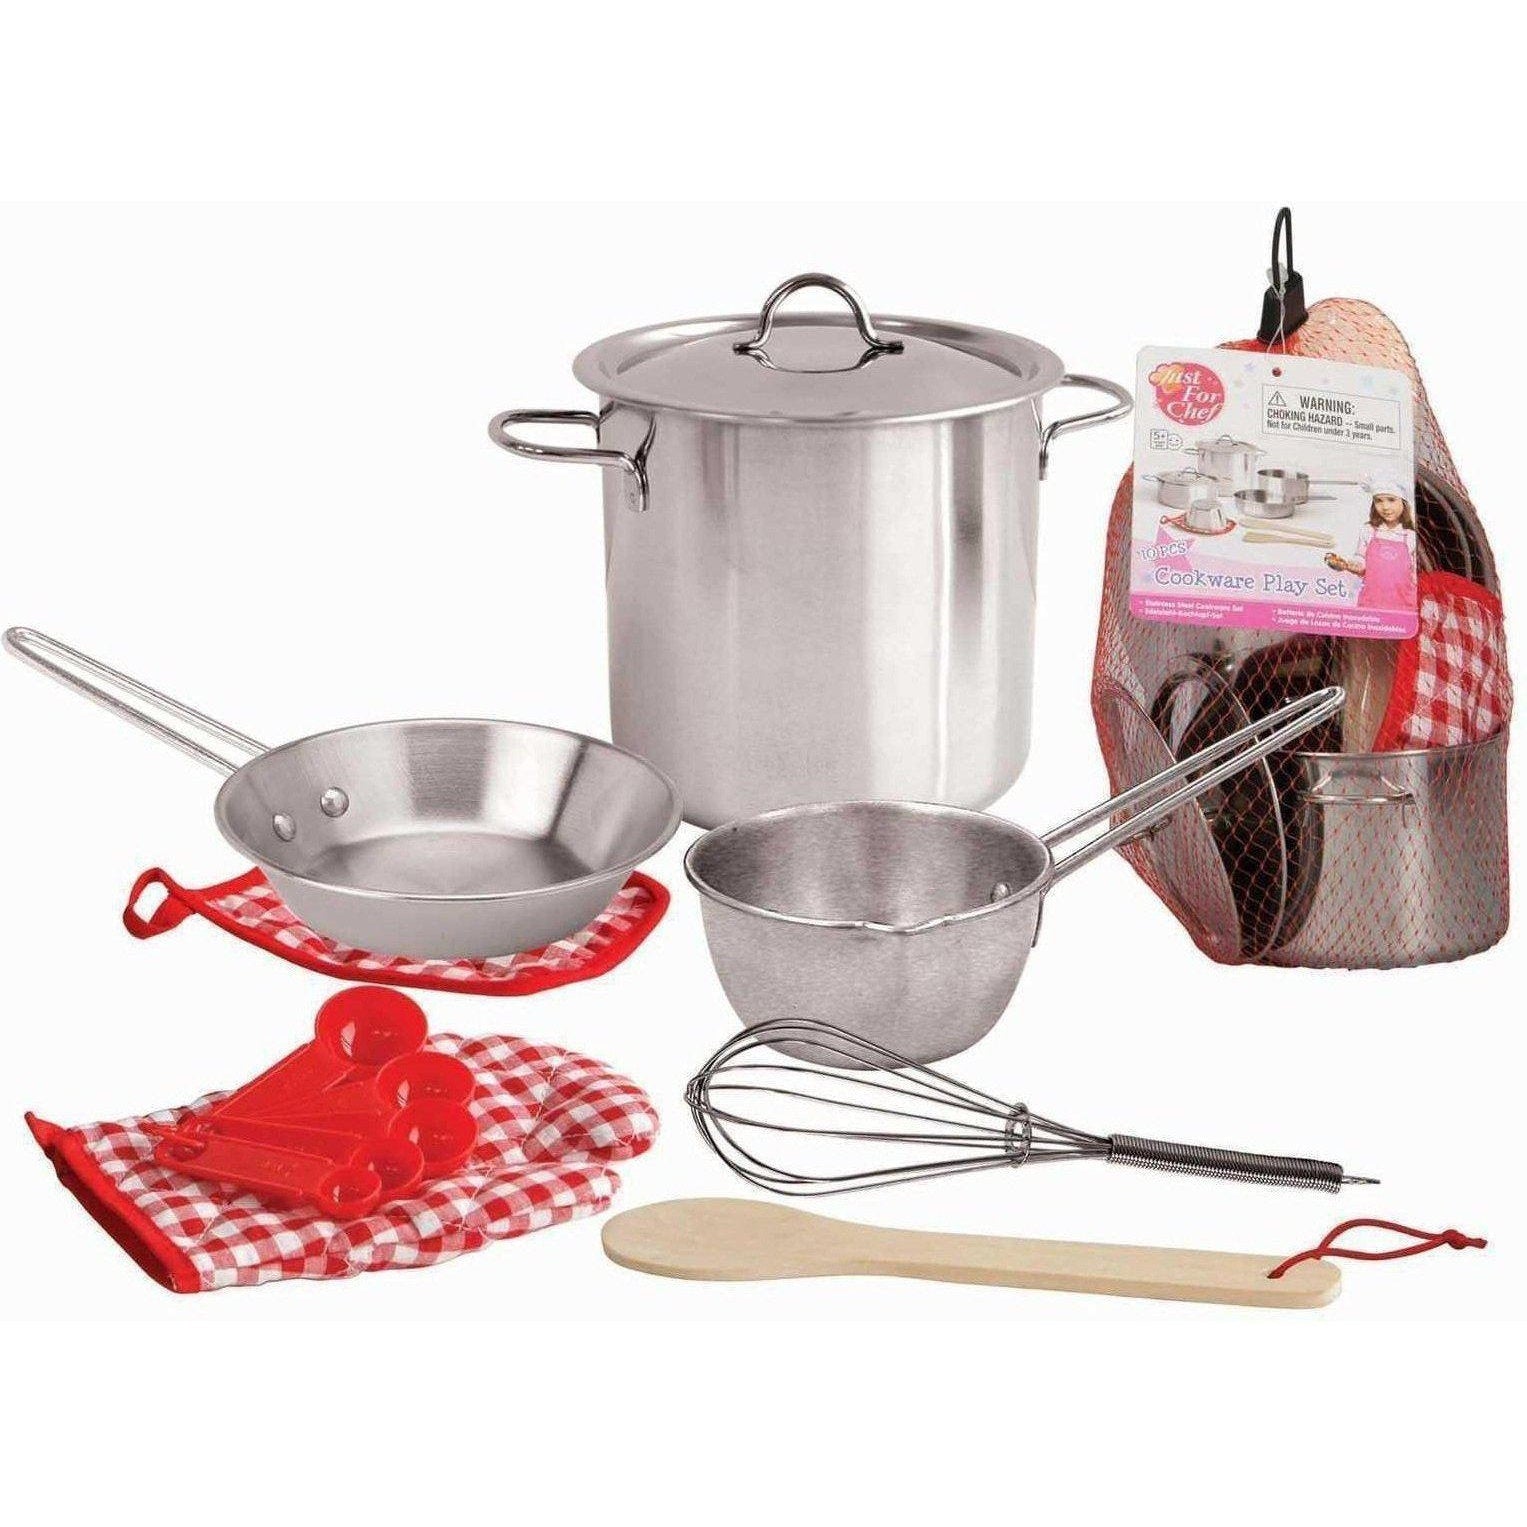 Toy Stainless Steel Cooking Play Set, Shop Now for Australia Delivery at Kids Mega Mart